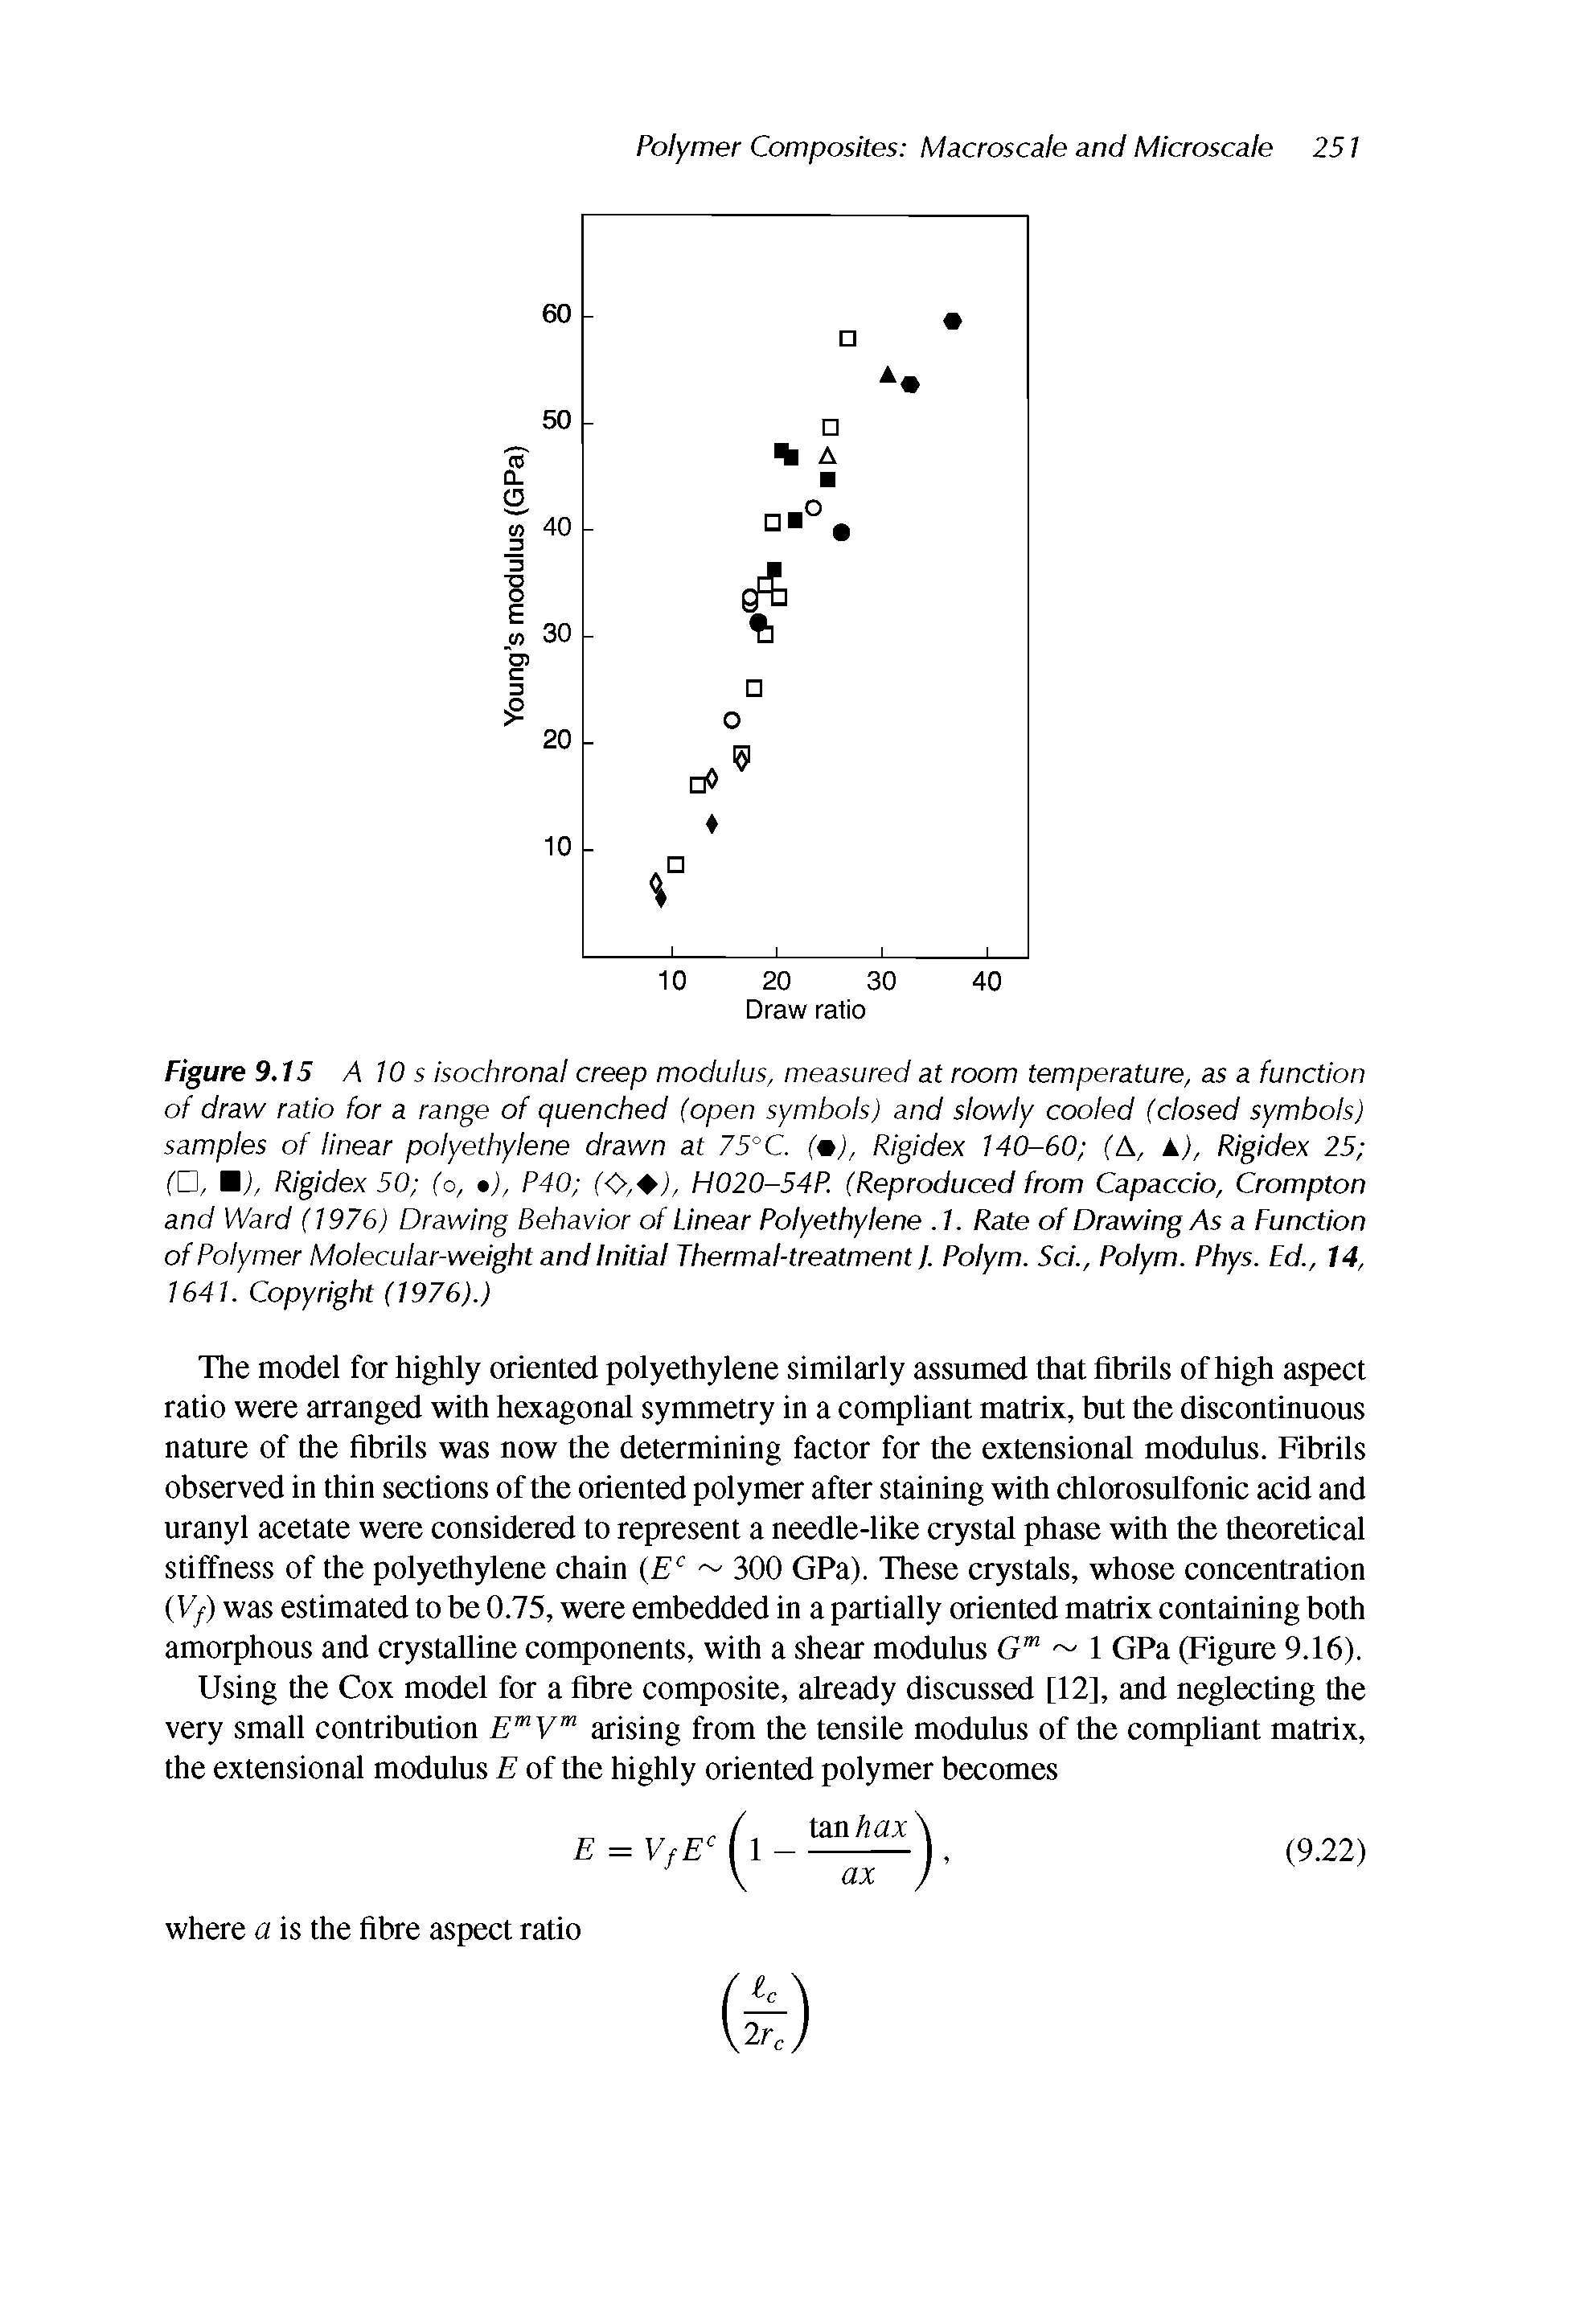 Figure 9.15 A W s isochronal creep modulus, measured at room temperature, as a function of draw ratio for a range of quenched (open symbols) and slowly cooled (closed symbols) samples of linear polyethylene drawn at 75°C. (m), Rigidex 140-60 (A, k), Rigidex 25 (D, M), Rigidex 50 (o, ), P40 (<>,- ), H020-54P. (Reproduced from Capaccio, Crompton and Ward (1976) Drawing Behavior of Linear Polyethylene. 1. Rate of Drawing As a Function of Polymer Molecular-weight and Initial Thermal-treatment I. Polym. Sci., Polym. Phys. Ed., 14, 1641. Copyright (1976).)...